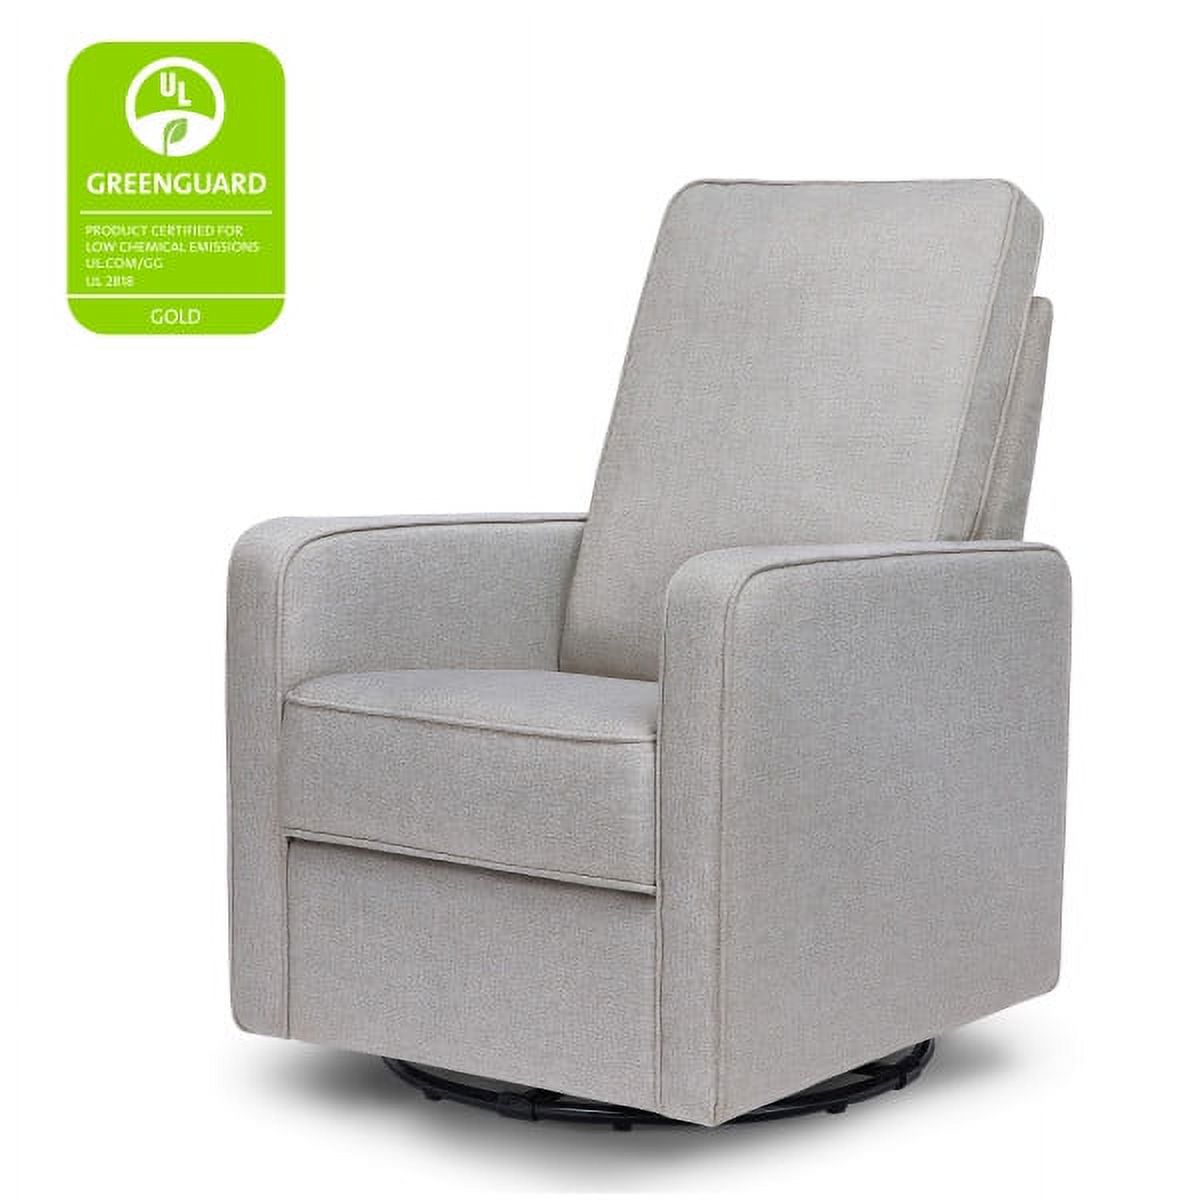 DaVinci Casey Pillowback Swivel Glider Chair in Misty Gray - image 2 of 7